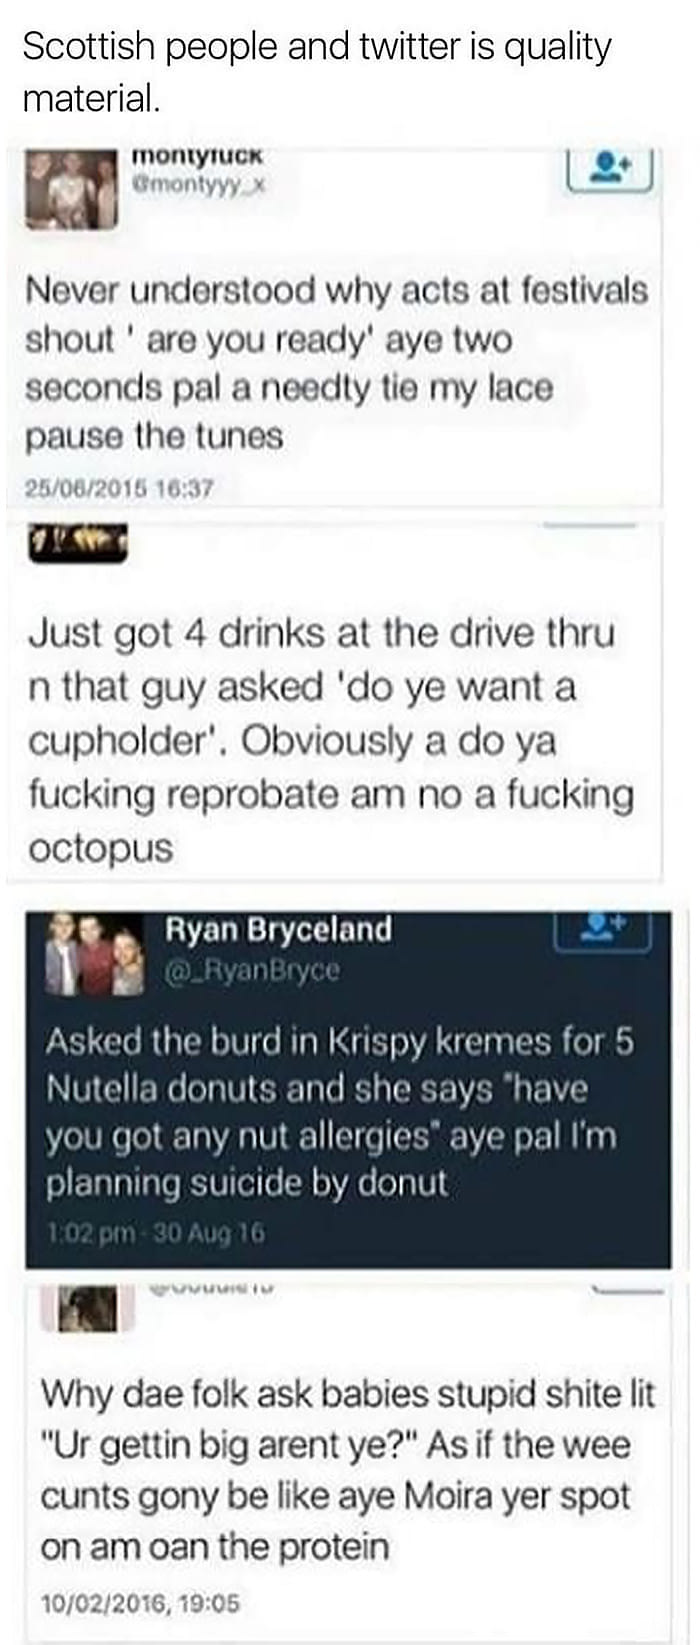 scottish people are twitter is quality material